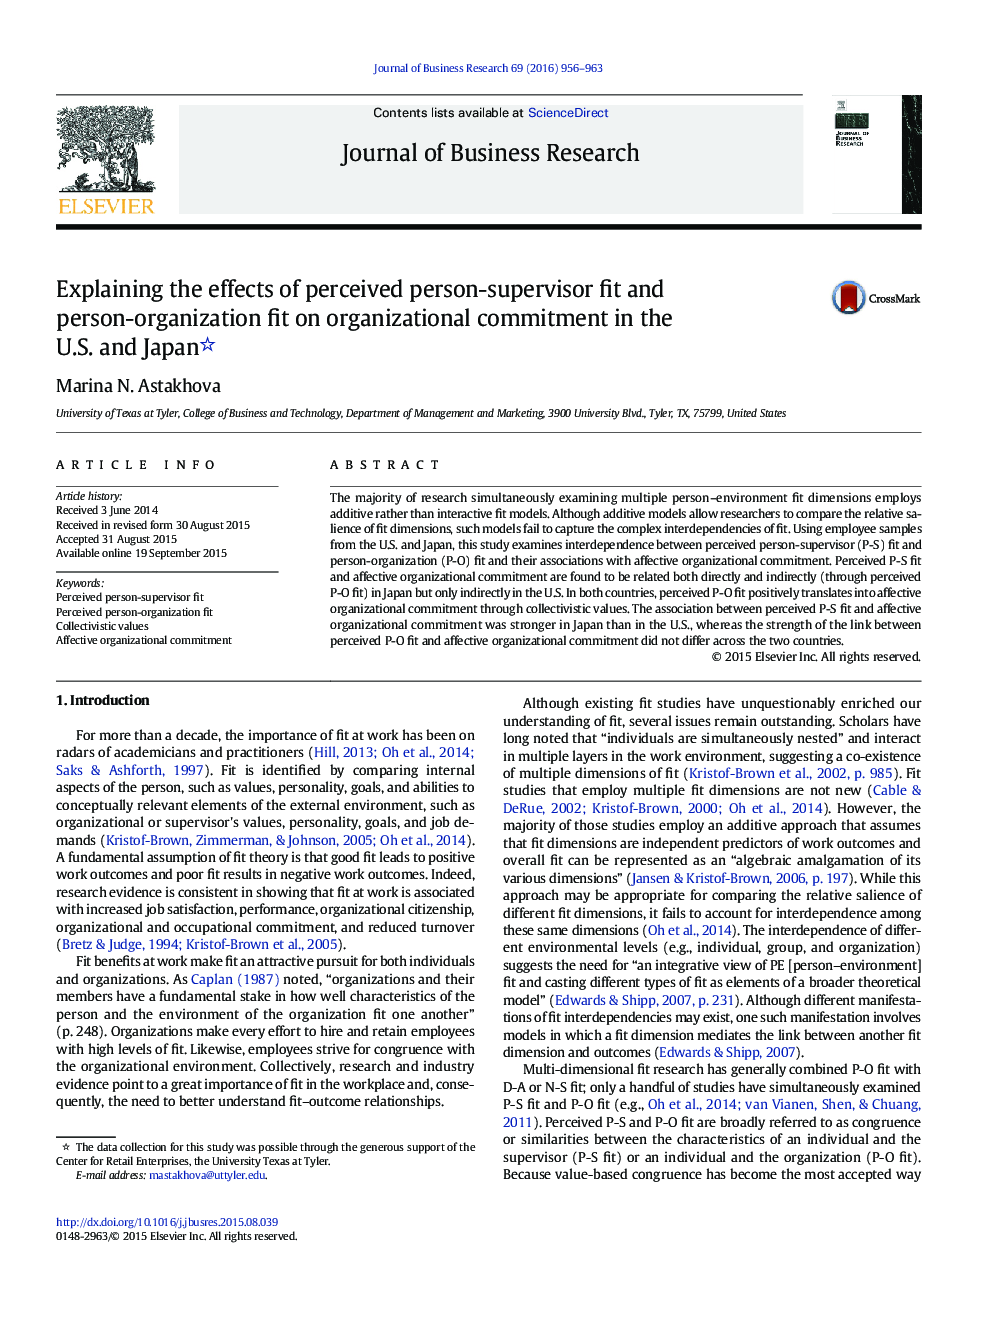 Explaining the effects of perceived person-supervisor fit and person-organization fit on organizational commitment in the U.S. and Japan